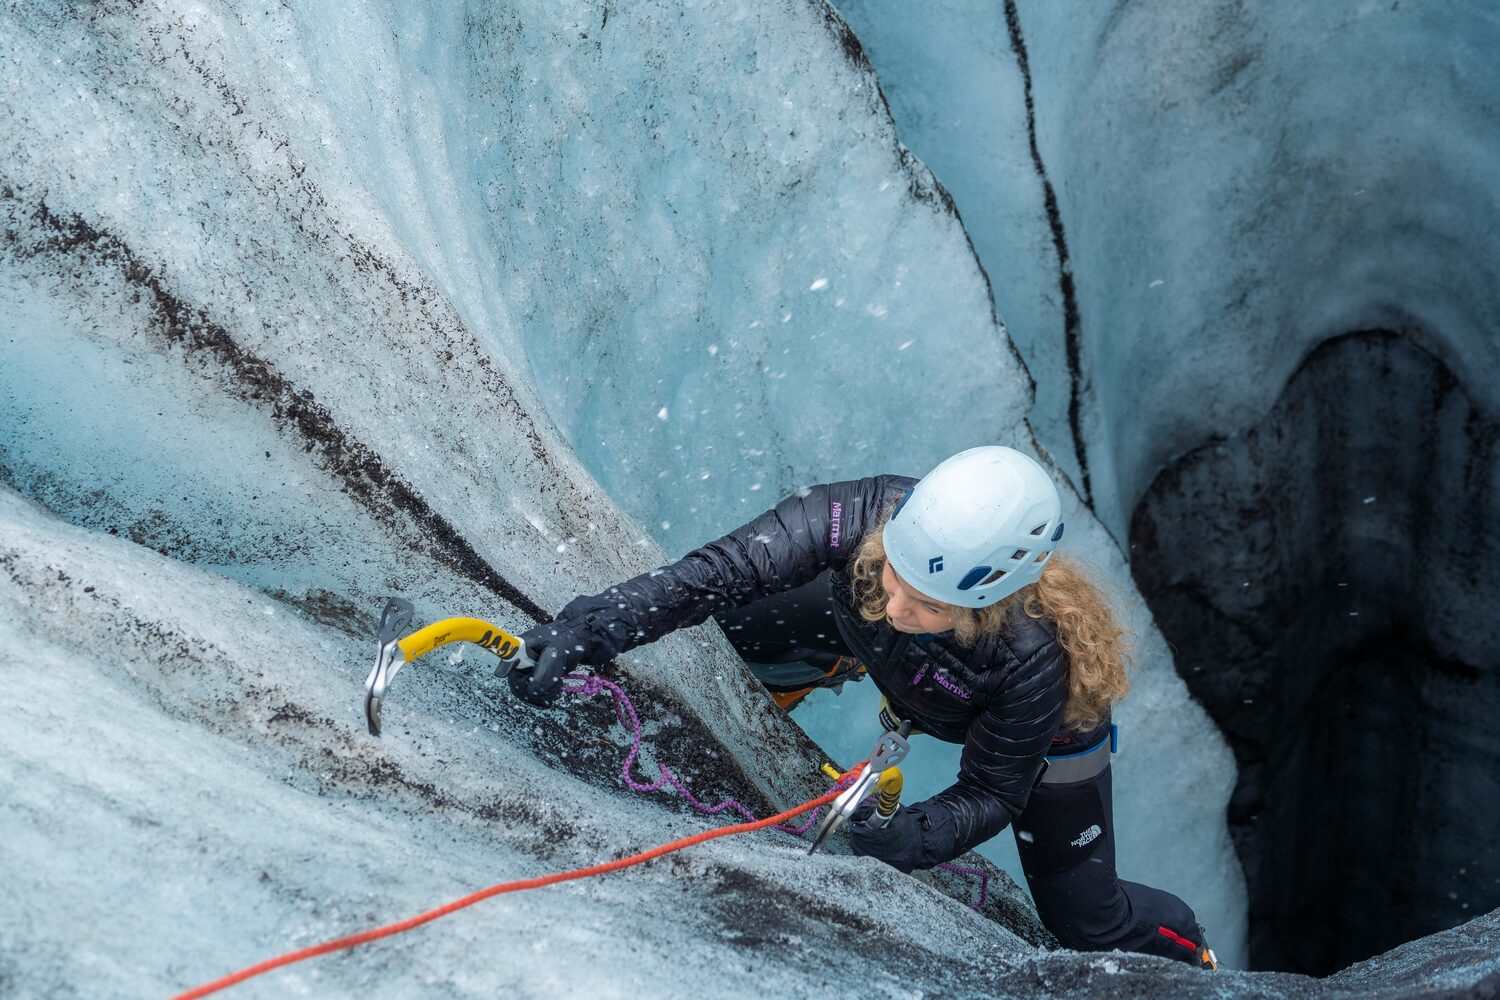 Female in white helmet climbing upwards from ice tunnel with yellow ice axes